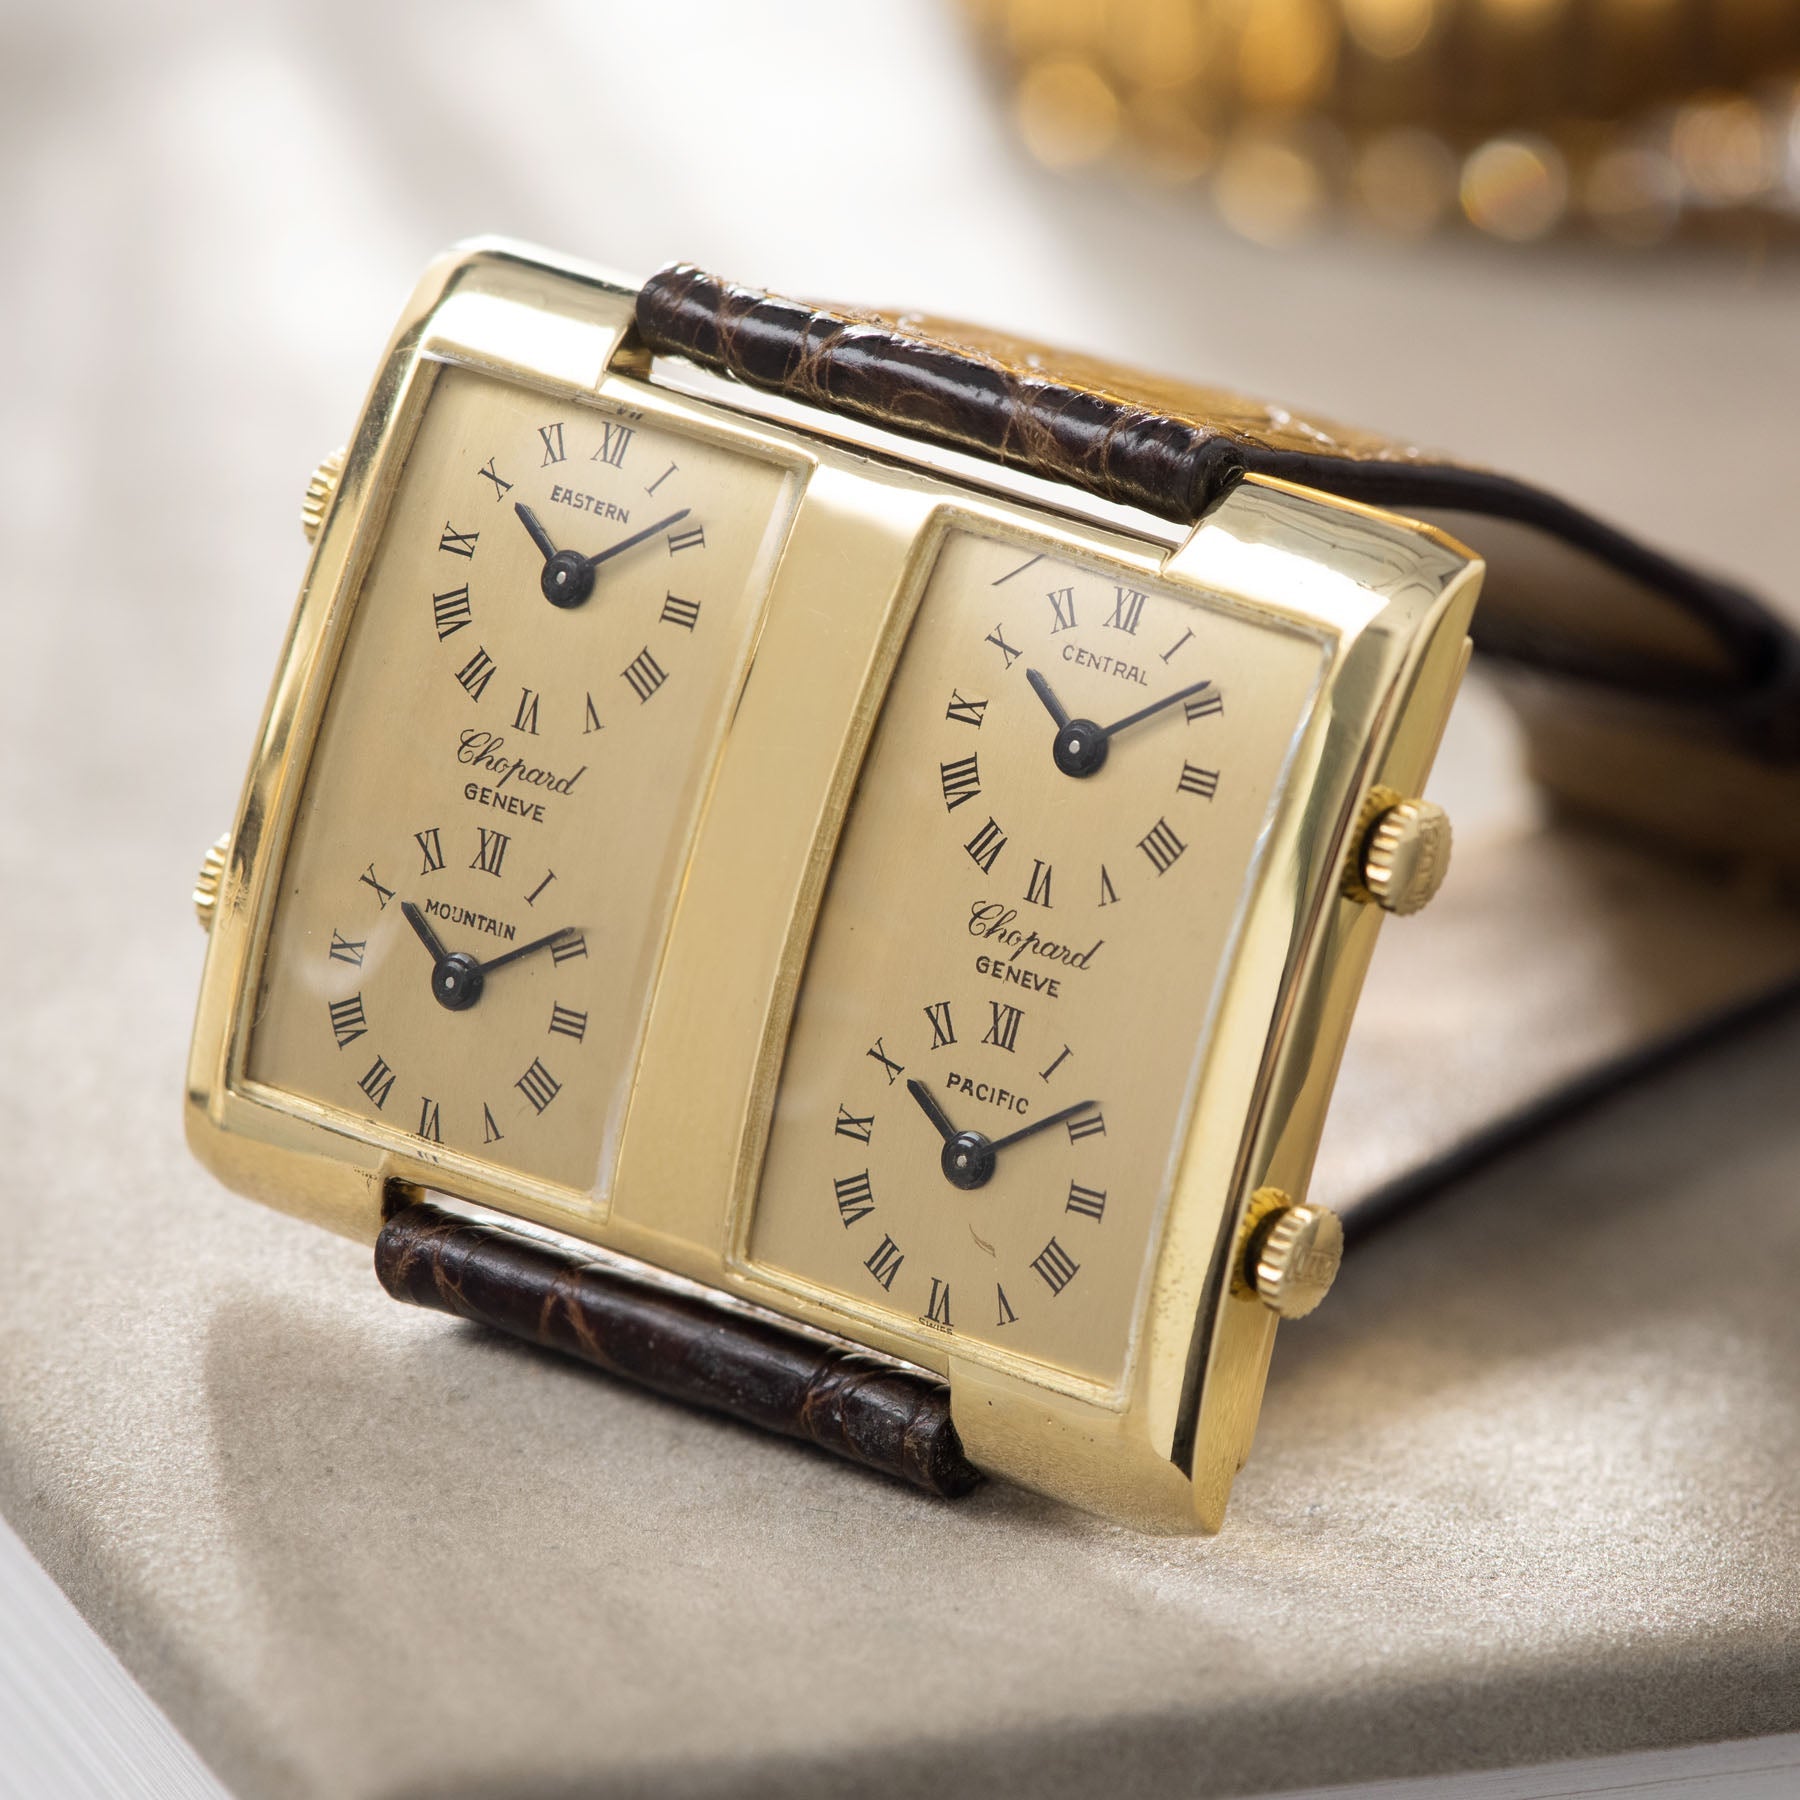 Crossing Continents – The Chopard Quadruple Timezone Watch